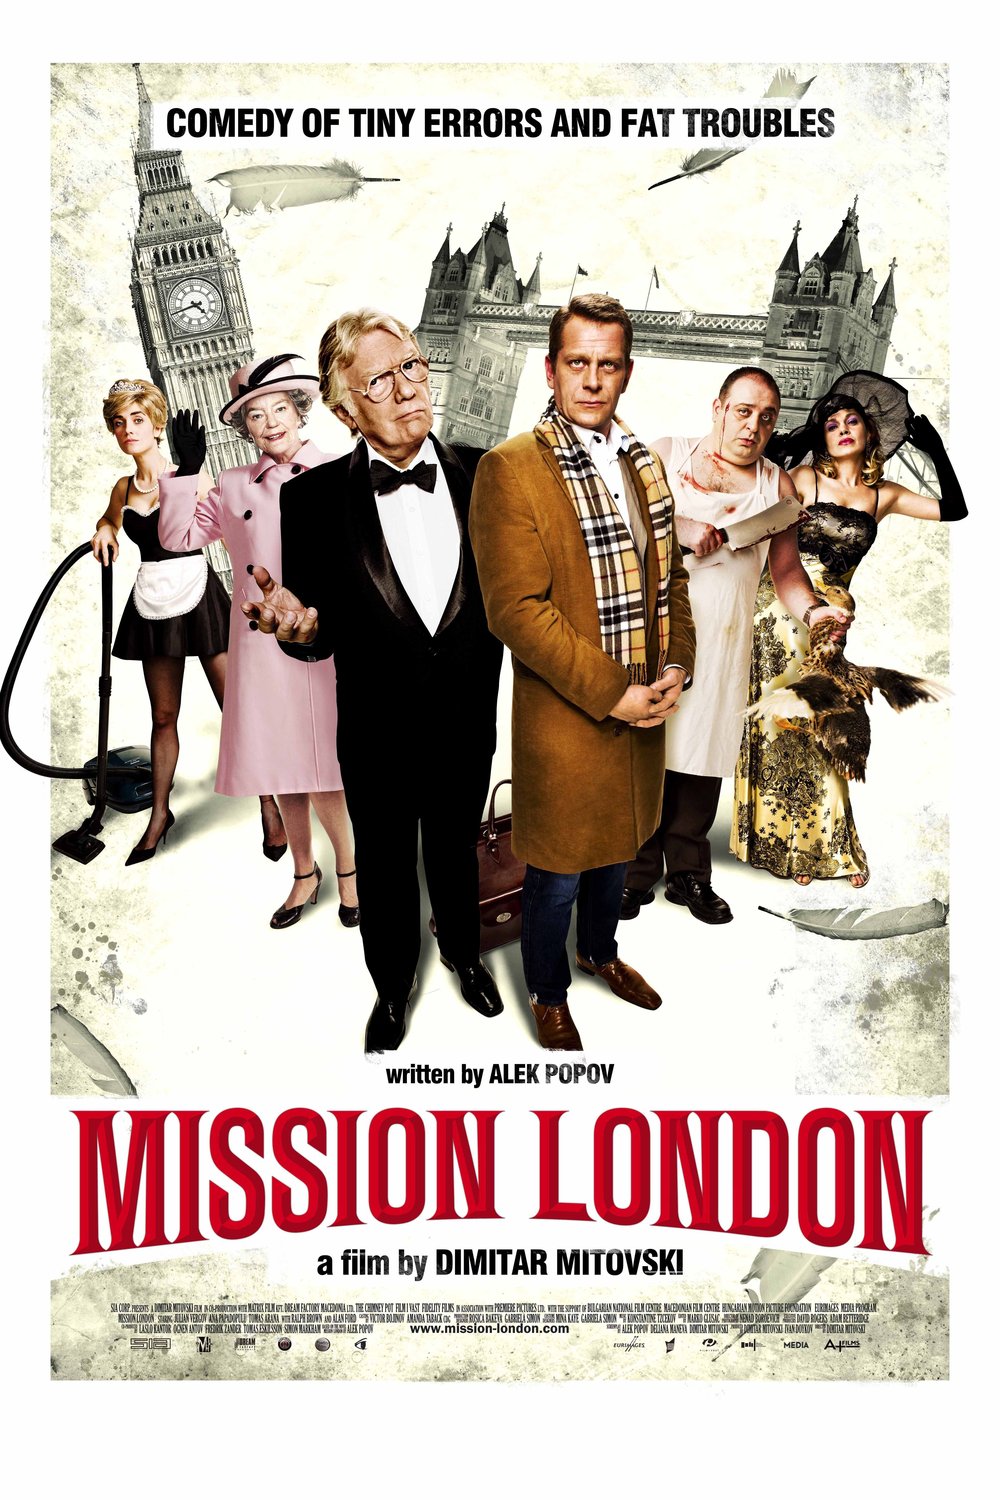 Poster of the movie Mission London